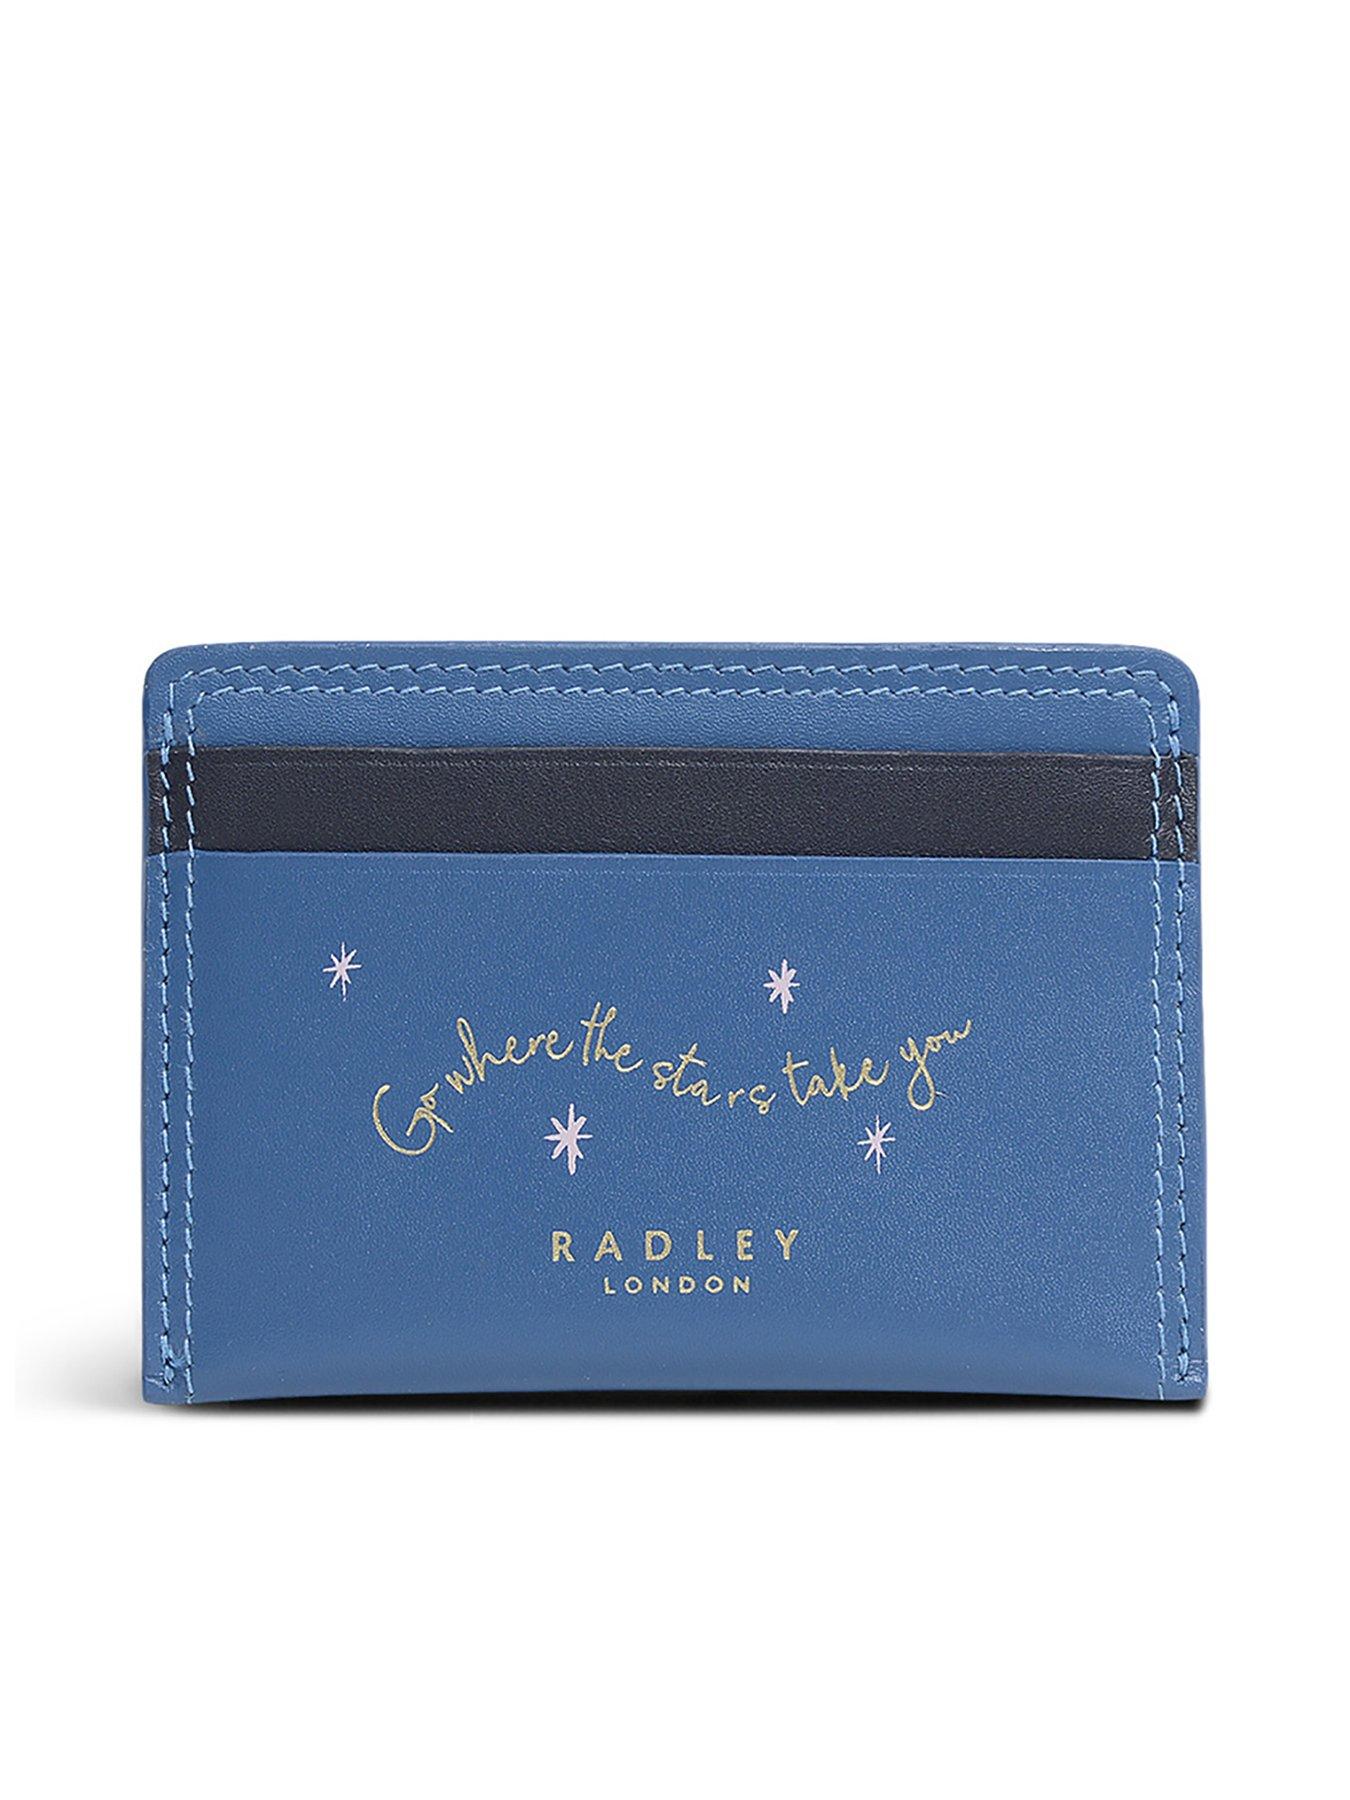  Moon Dog Leather Small Cardholder - Teal